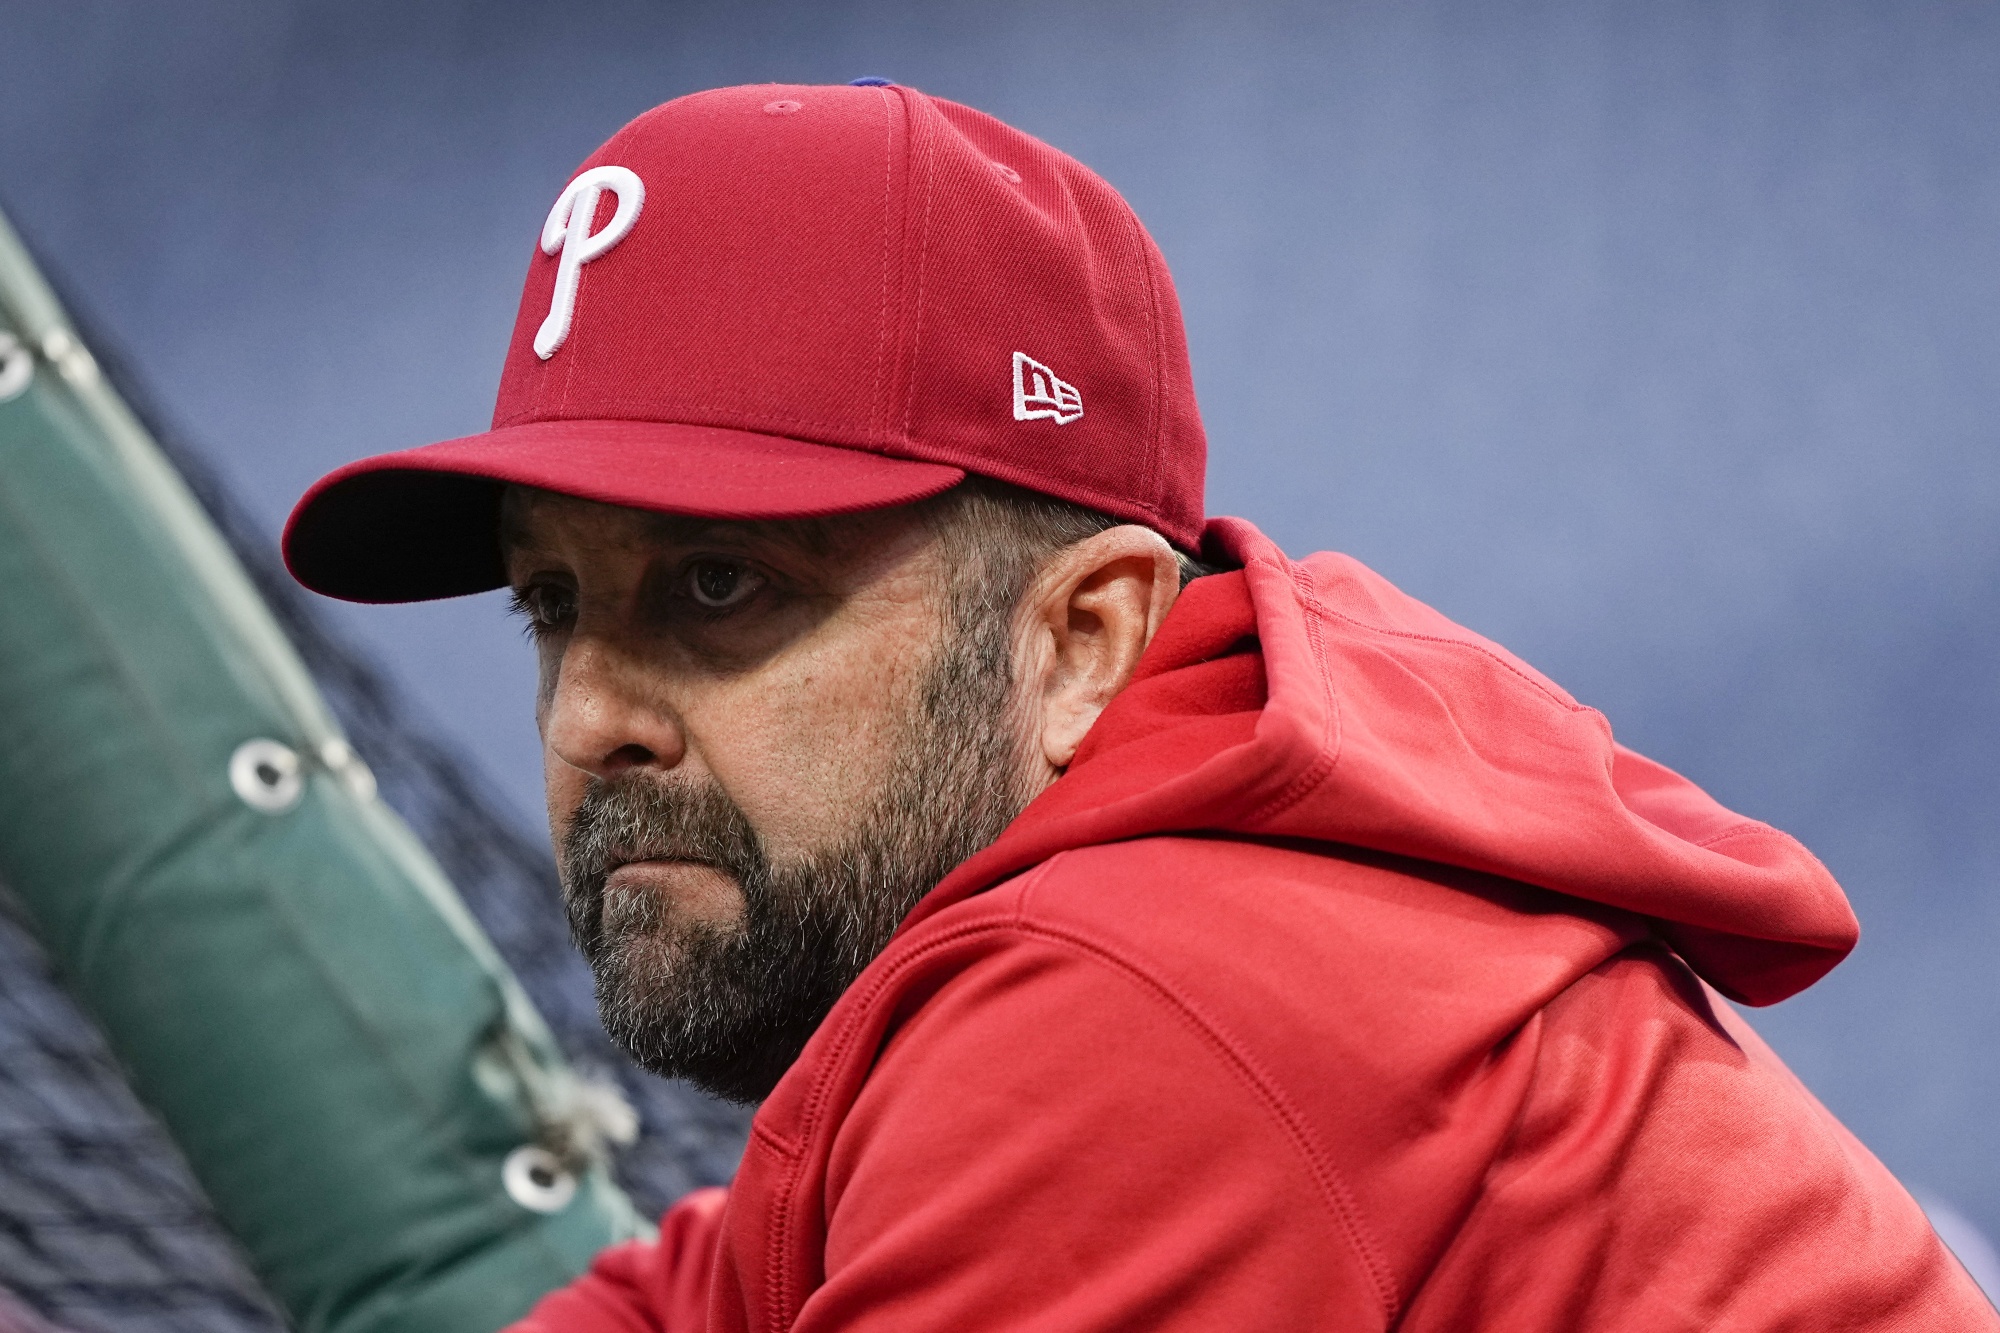 Phillies' Long in Search of Hits, Seeks 3rd Series Ring - Bloomberg